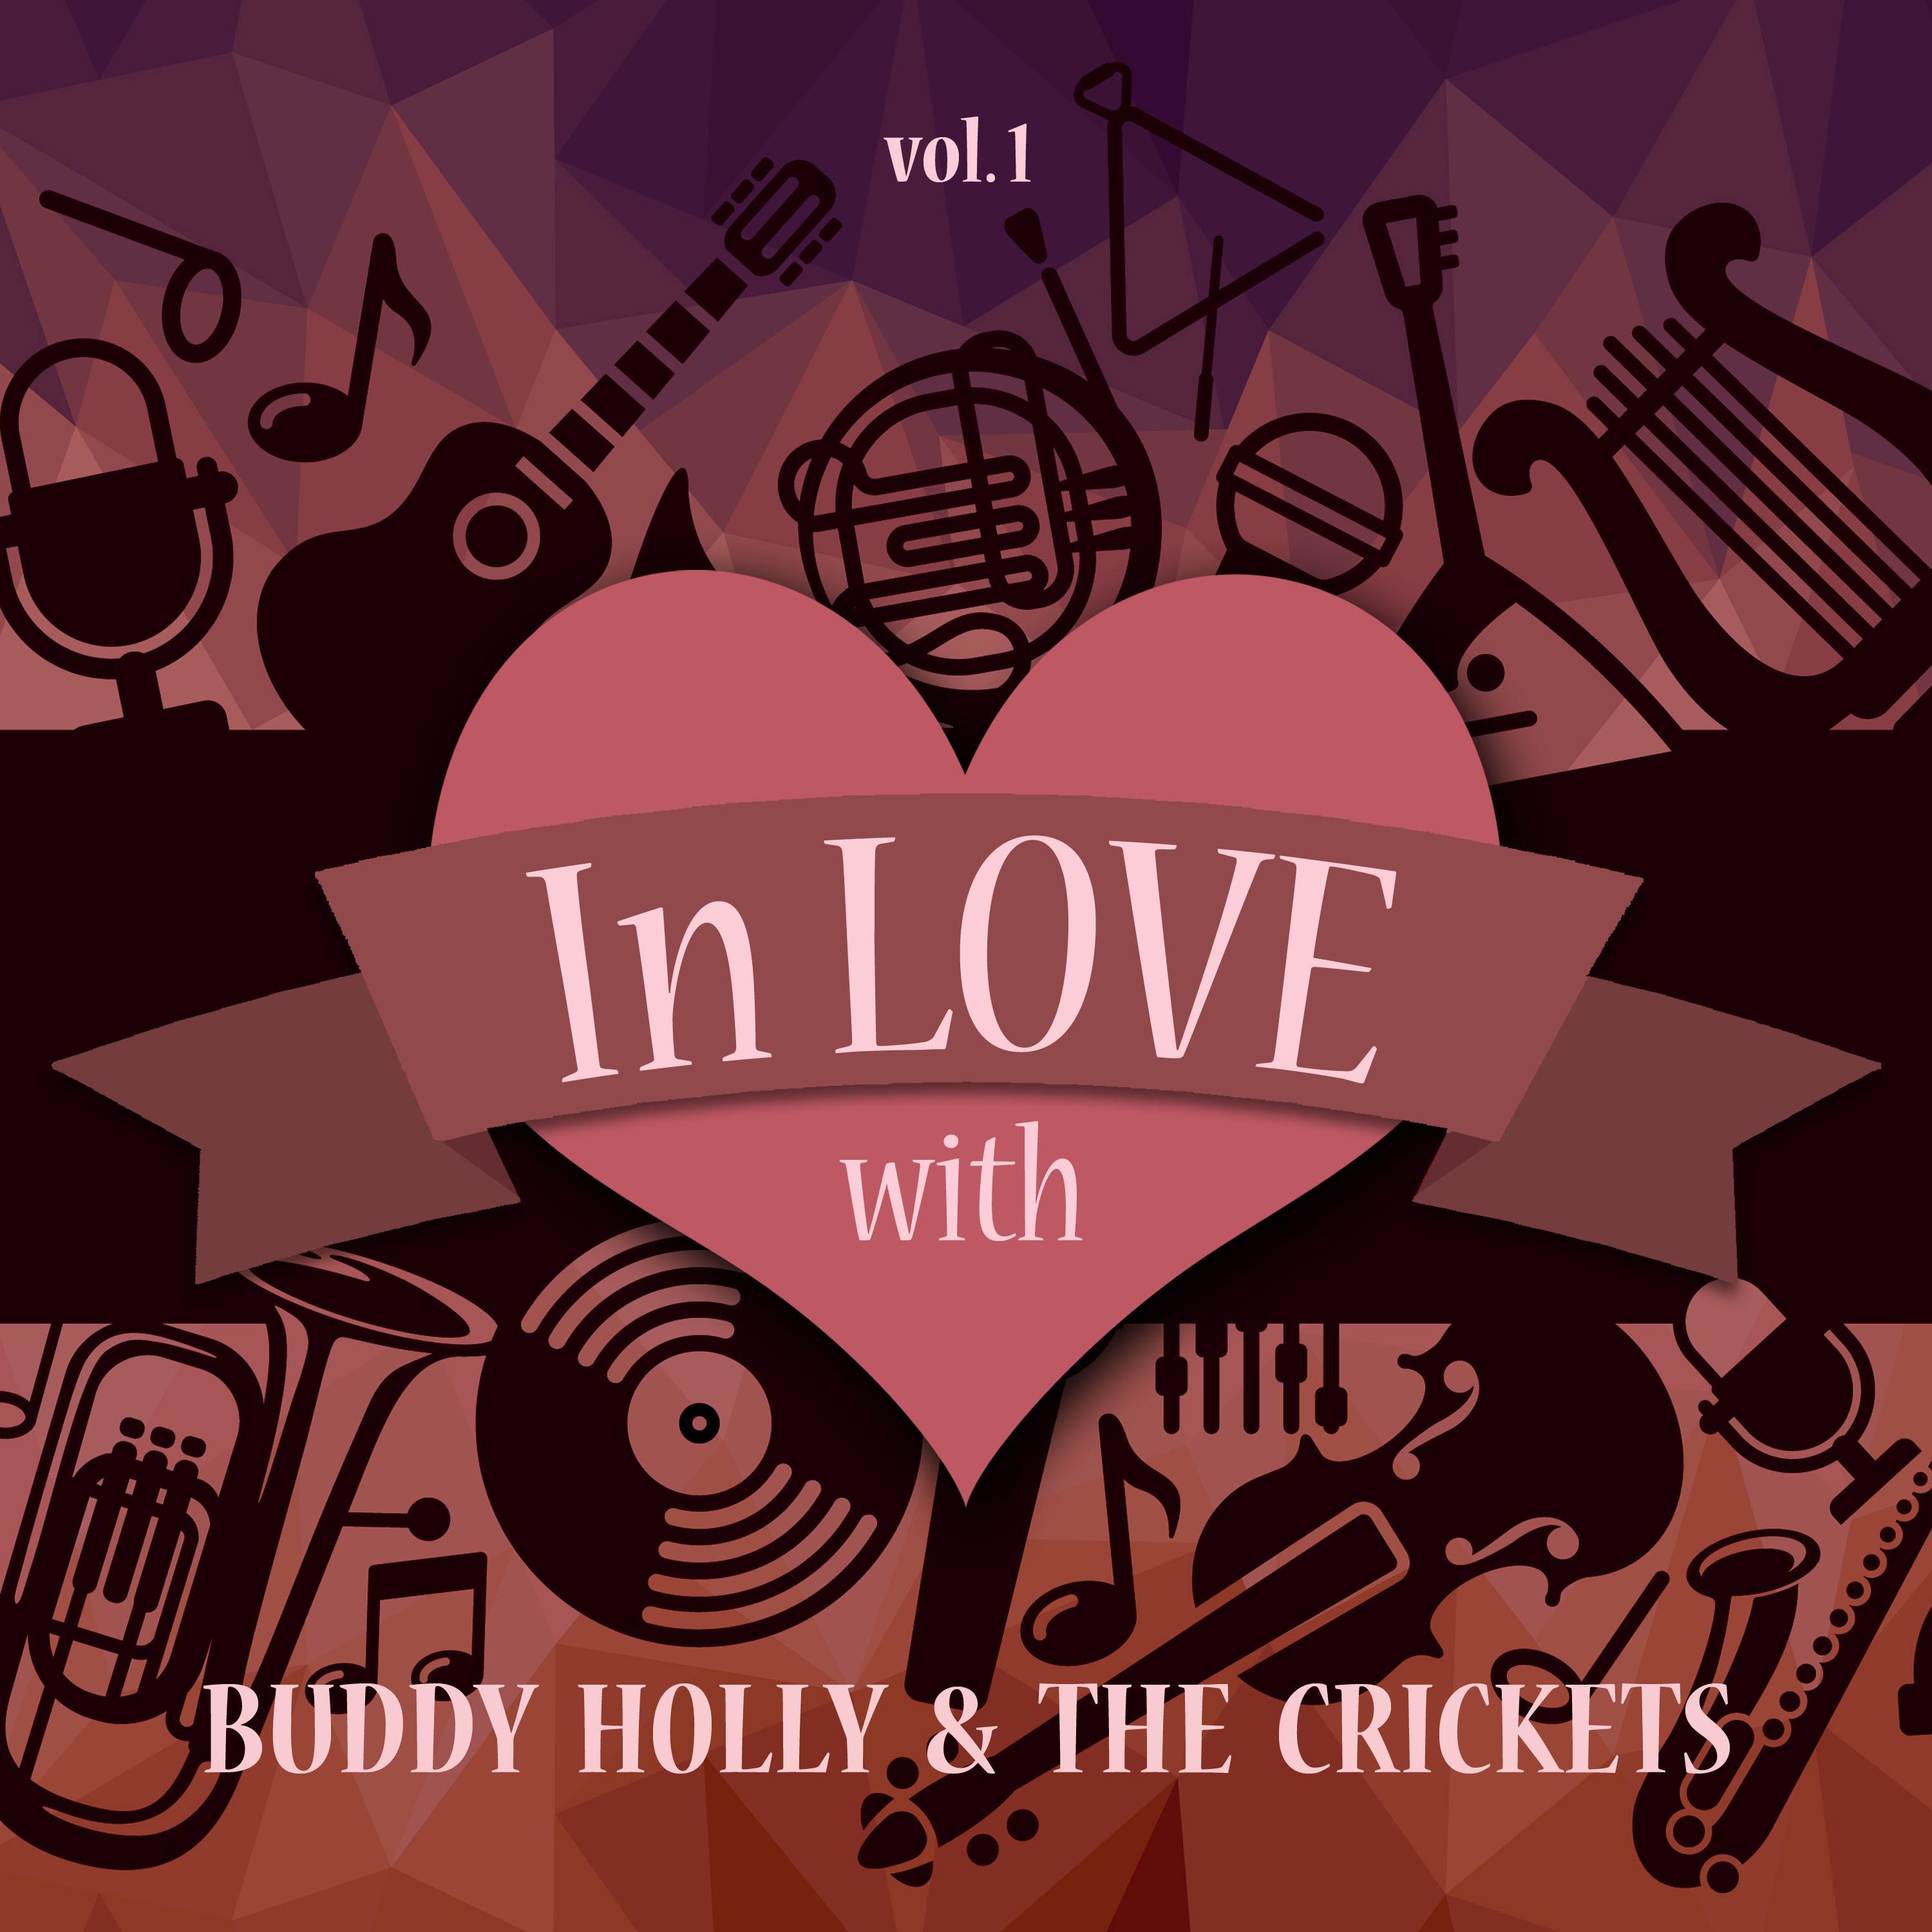 In Love with Buddy Holly & the Crickets, Vol. 1